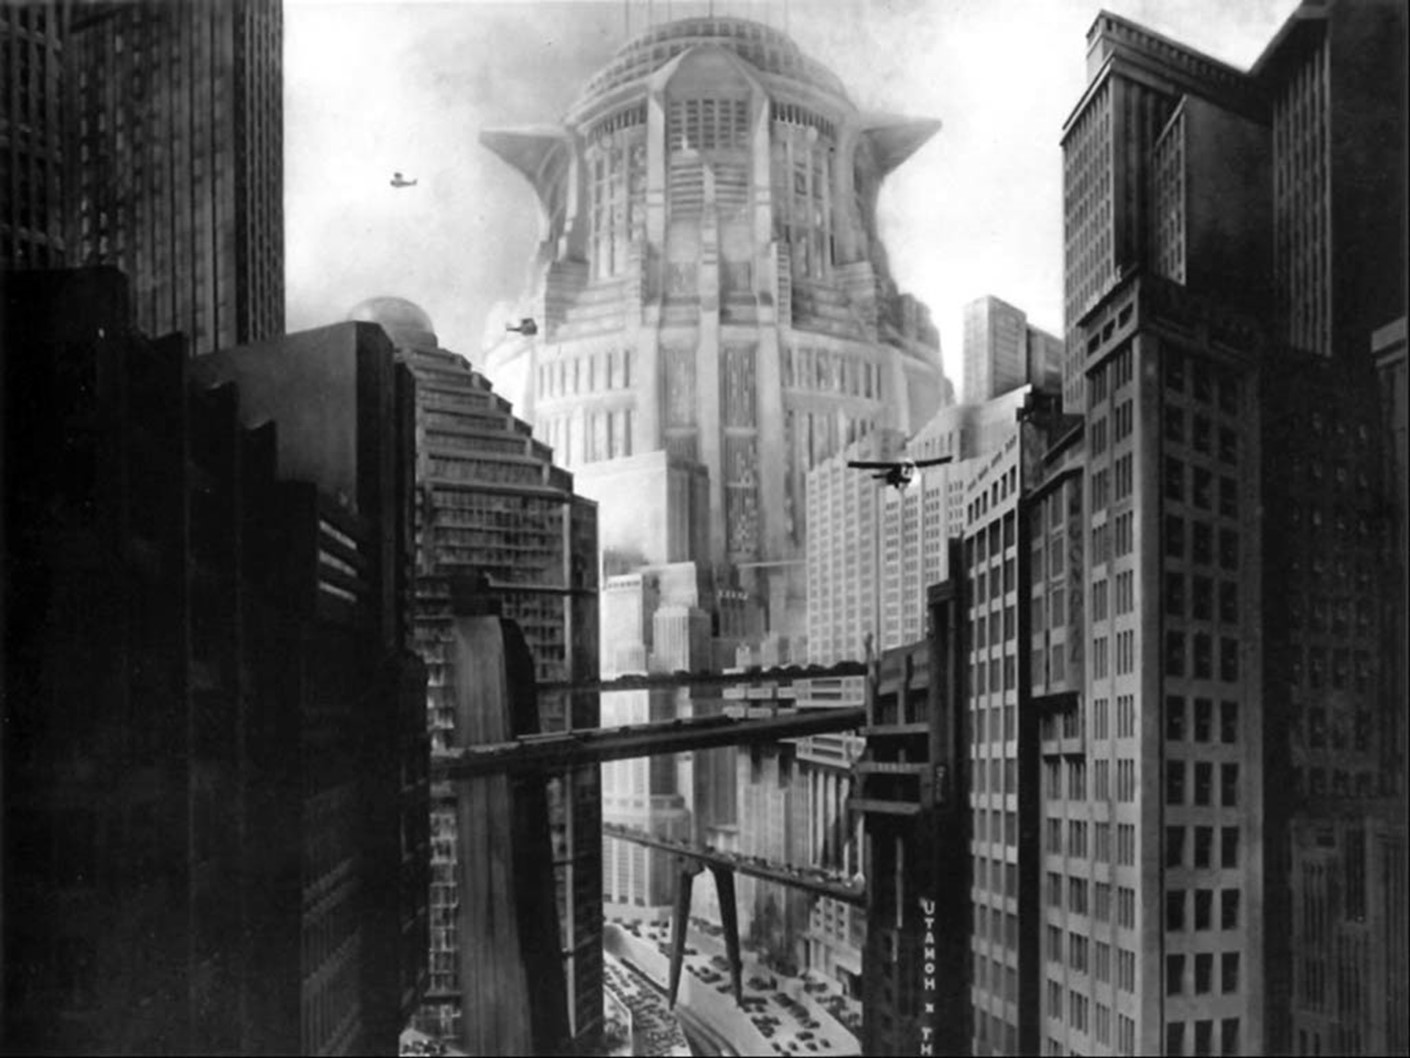 In Fritz Lang‘s Metropolis (1927), the opposition between the Upper City and the Lower City still works nowadays as a social metaphor for the wealthy classes and the working classes. © Breve Storia del Cinema | Flikr